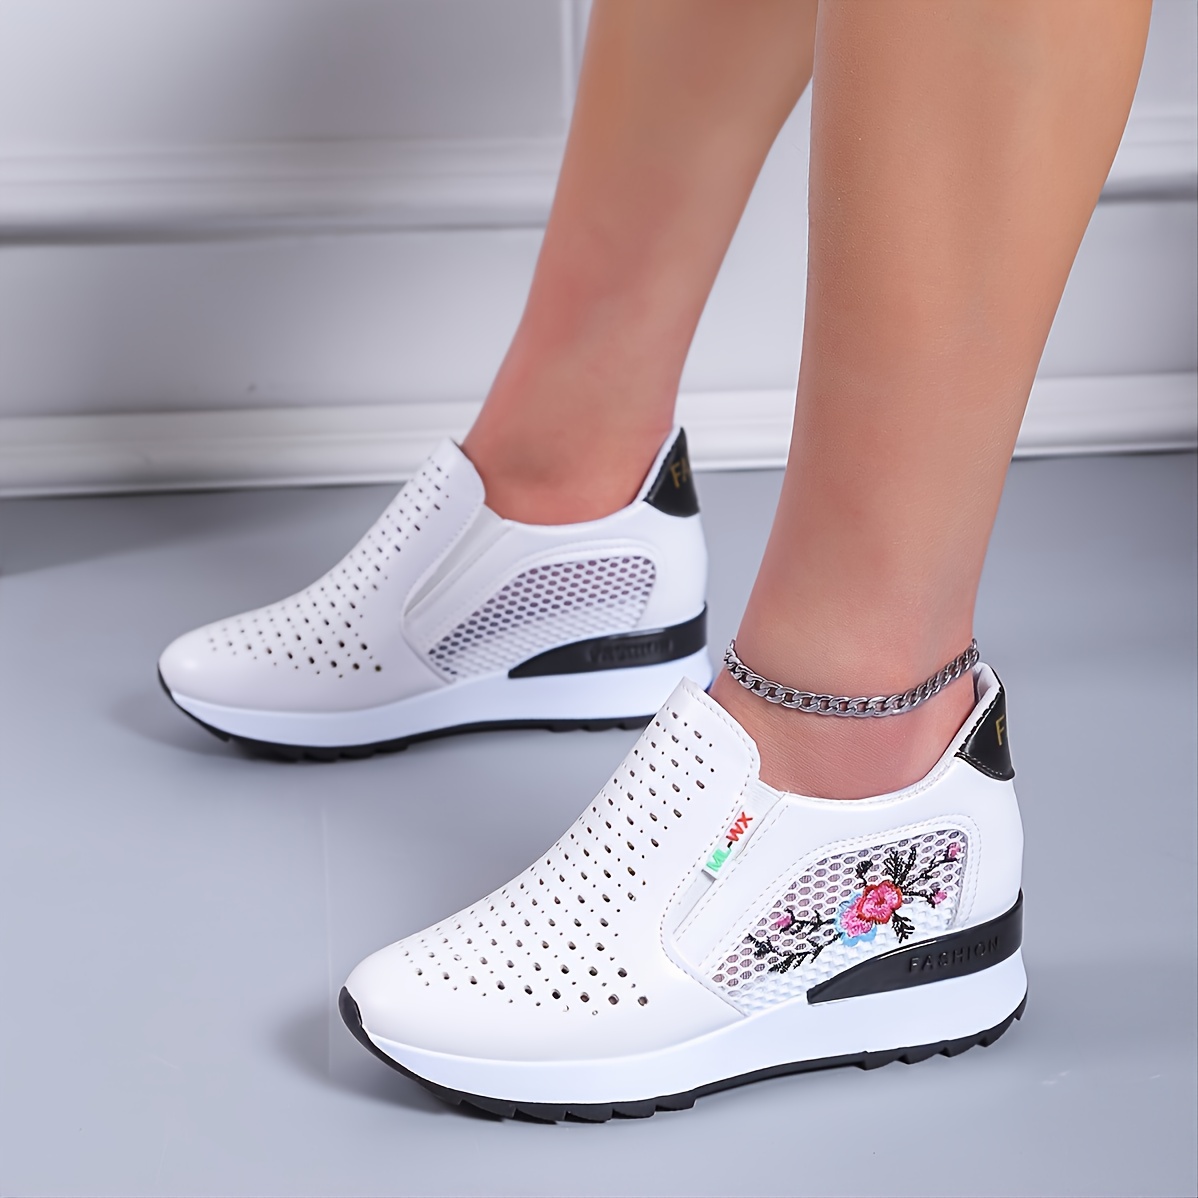 Women's Floral Embroidery Breathable Thick Sole Casual Sneakers